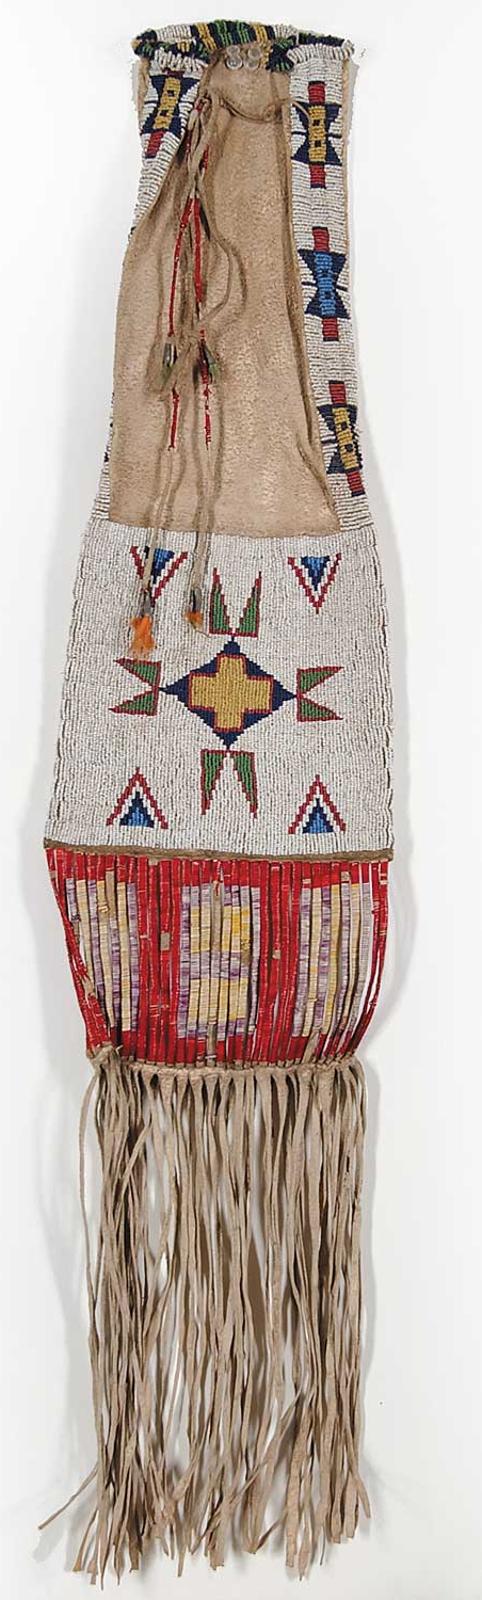 First Nations Basket School - Pipe Bag